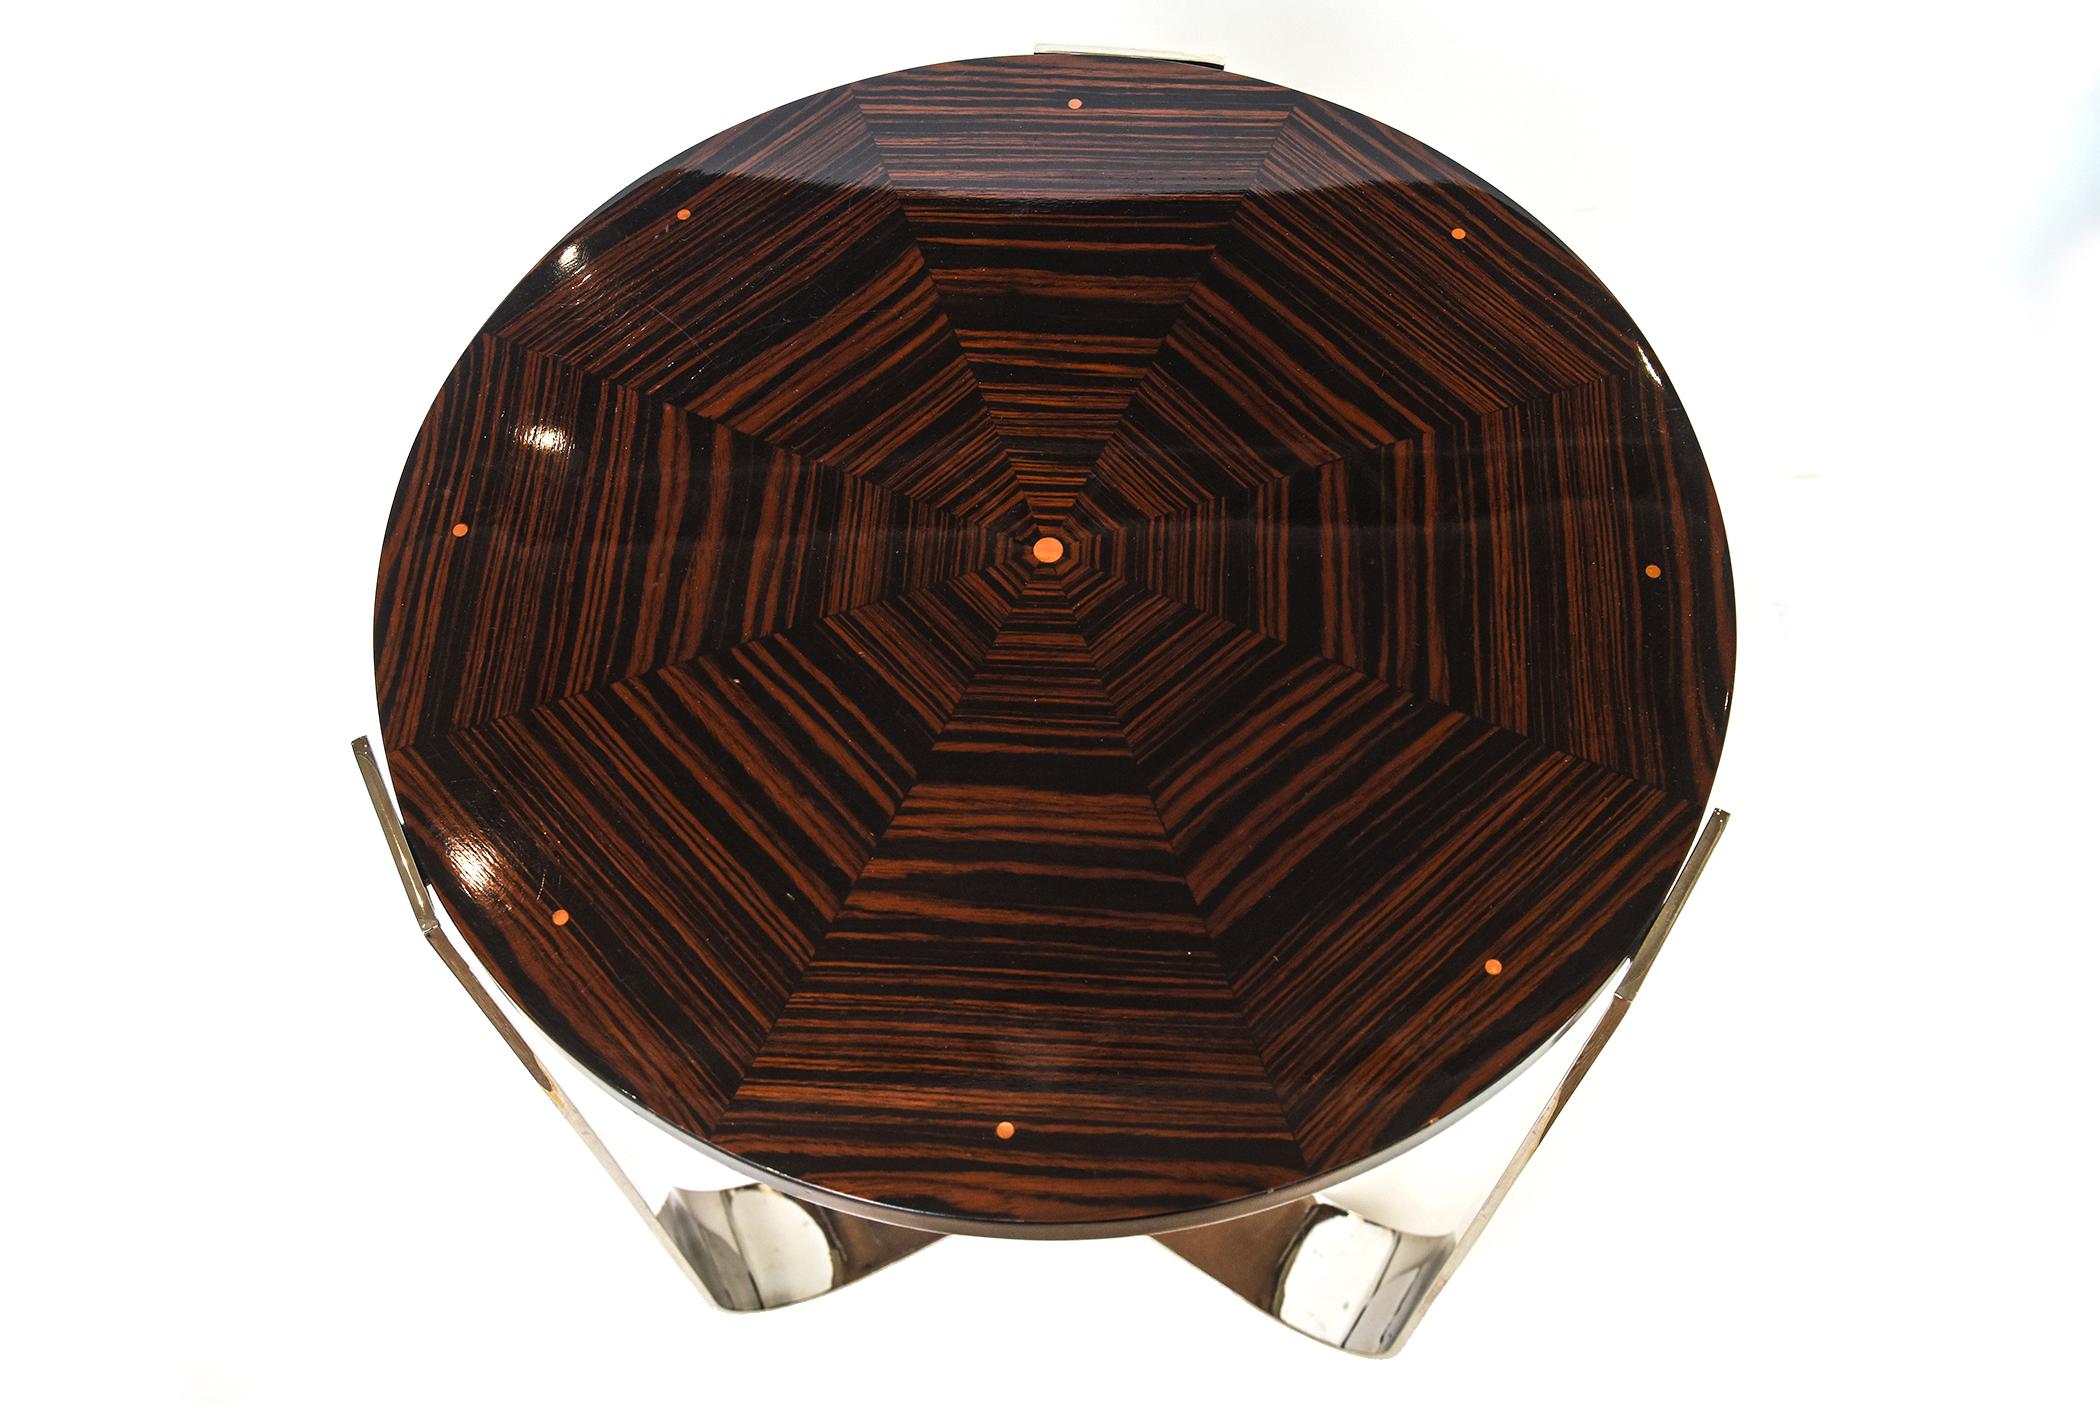 Art Deco Rosewood, Wood and Chrome Plated Stainless Steel Side Table Deco Style Pair